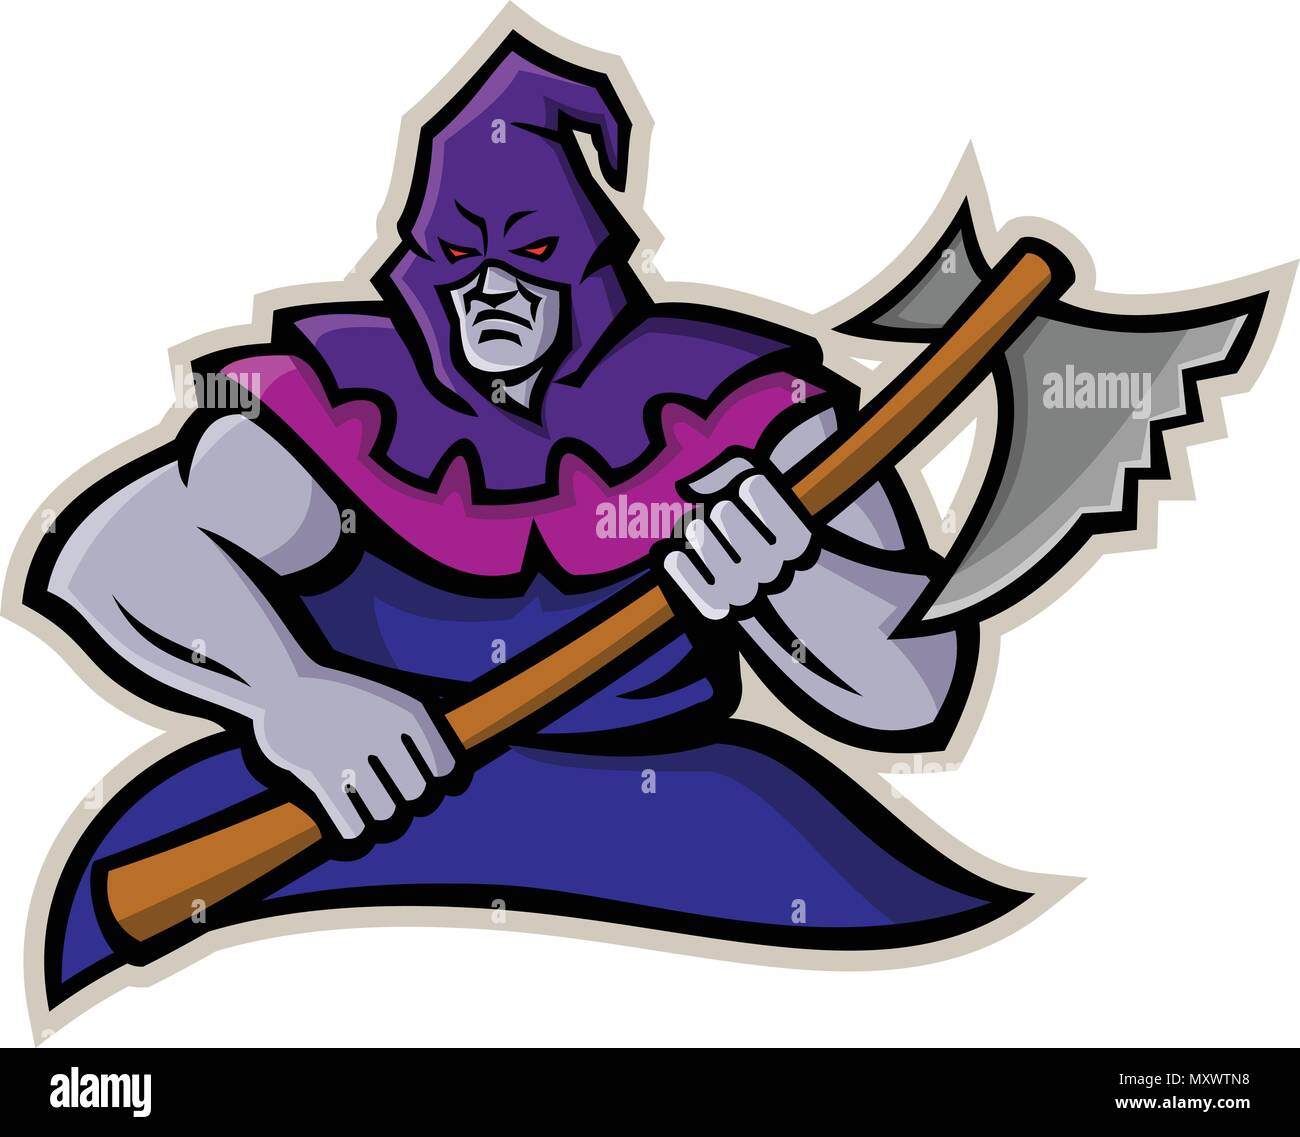 Mascot icon illustration of a hooded medieval or absolutist executioner or headsman  carrying an axe viewed from front on isolated background in retro Stock Vector